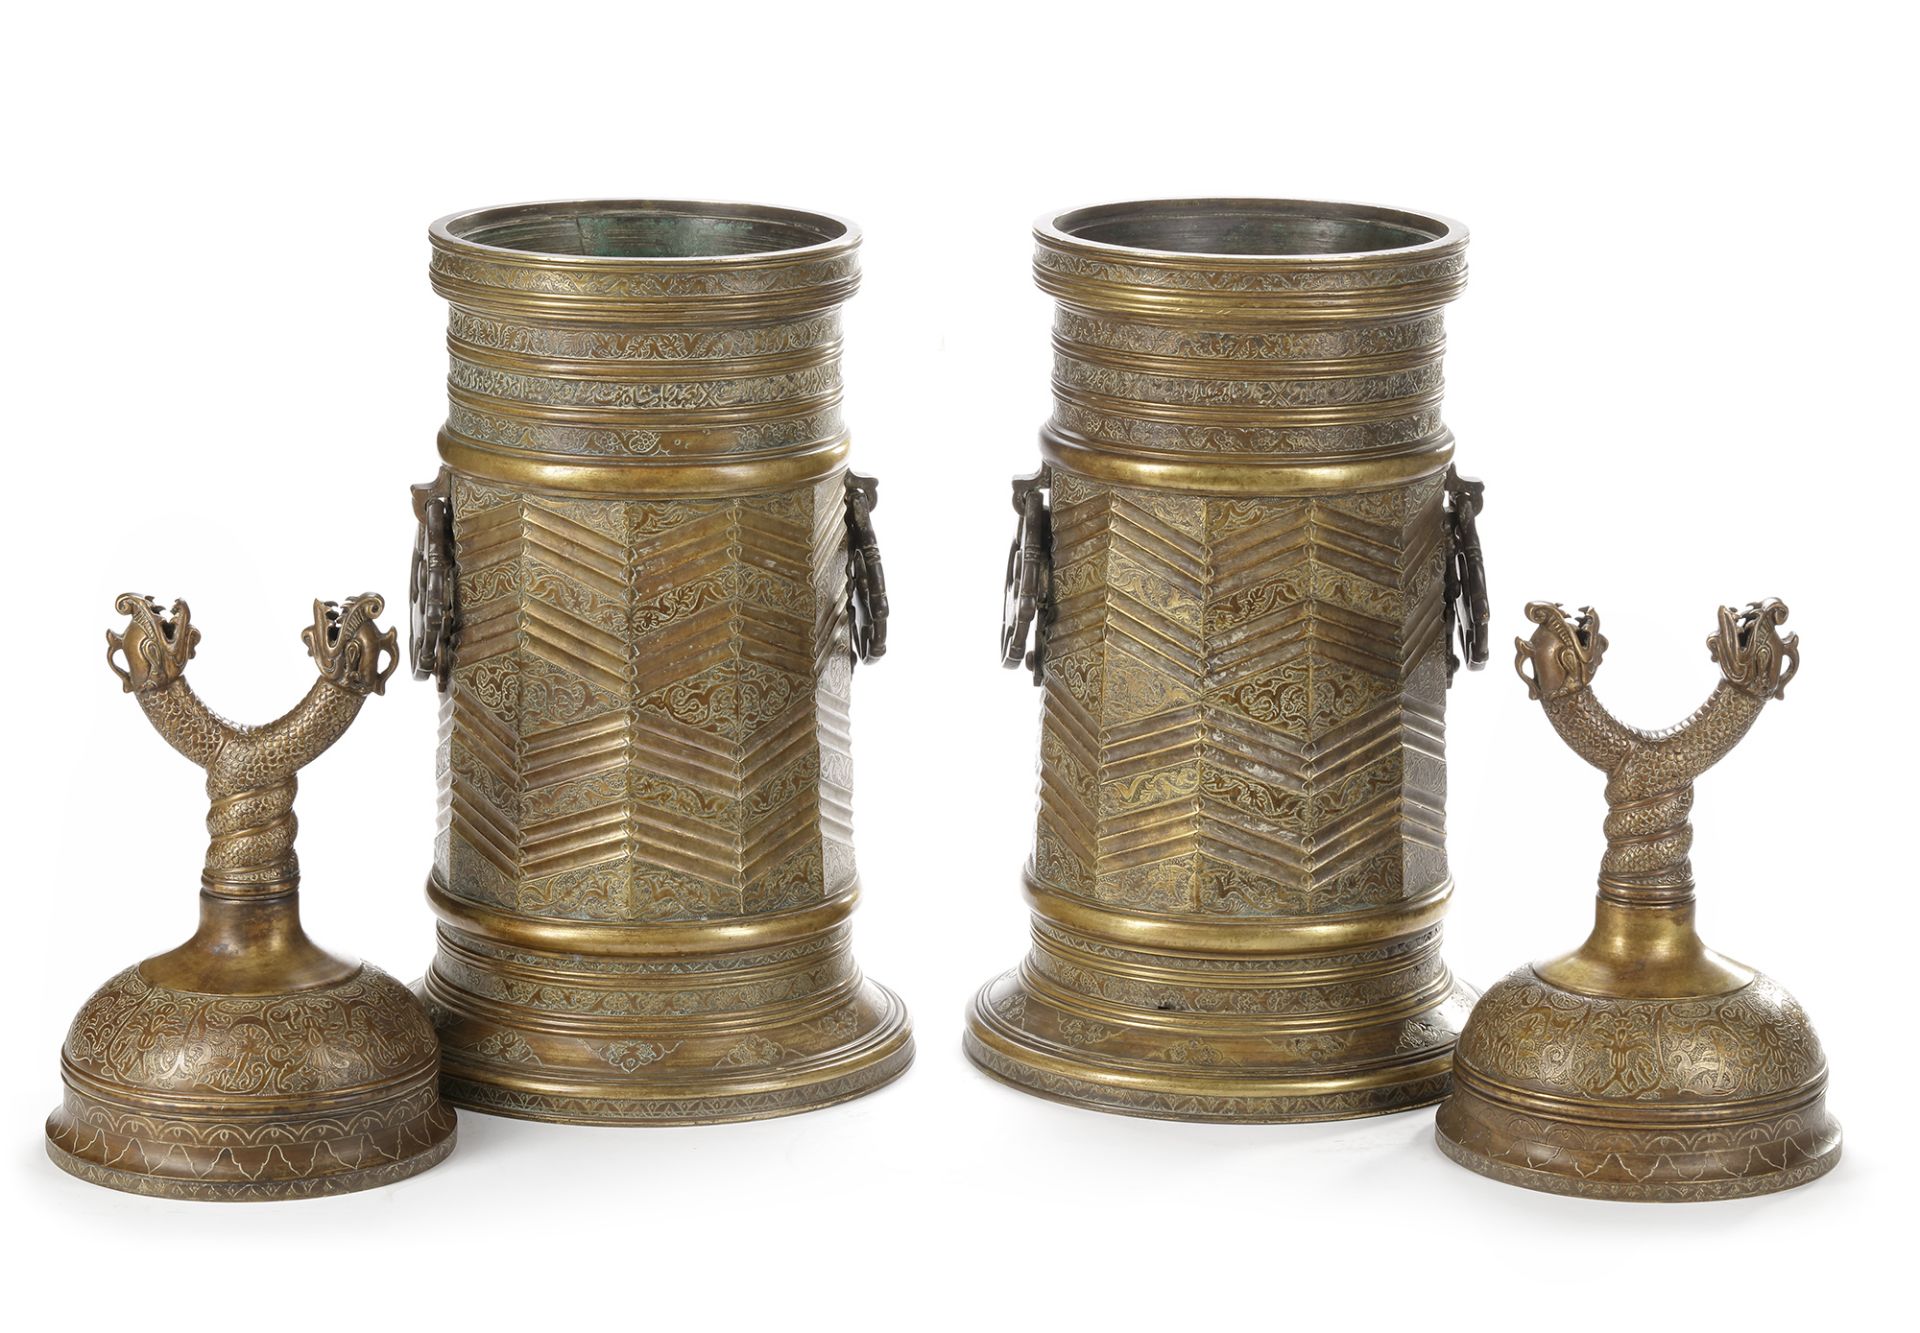 A PAIR OF LARGE SAFAVID STYLE ENGRAVED BRASS TORCH STANDS, PERSIA, 18TH-19TH CENTURY - Image 2 of 5